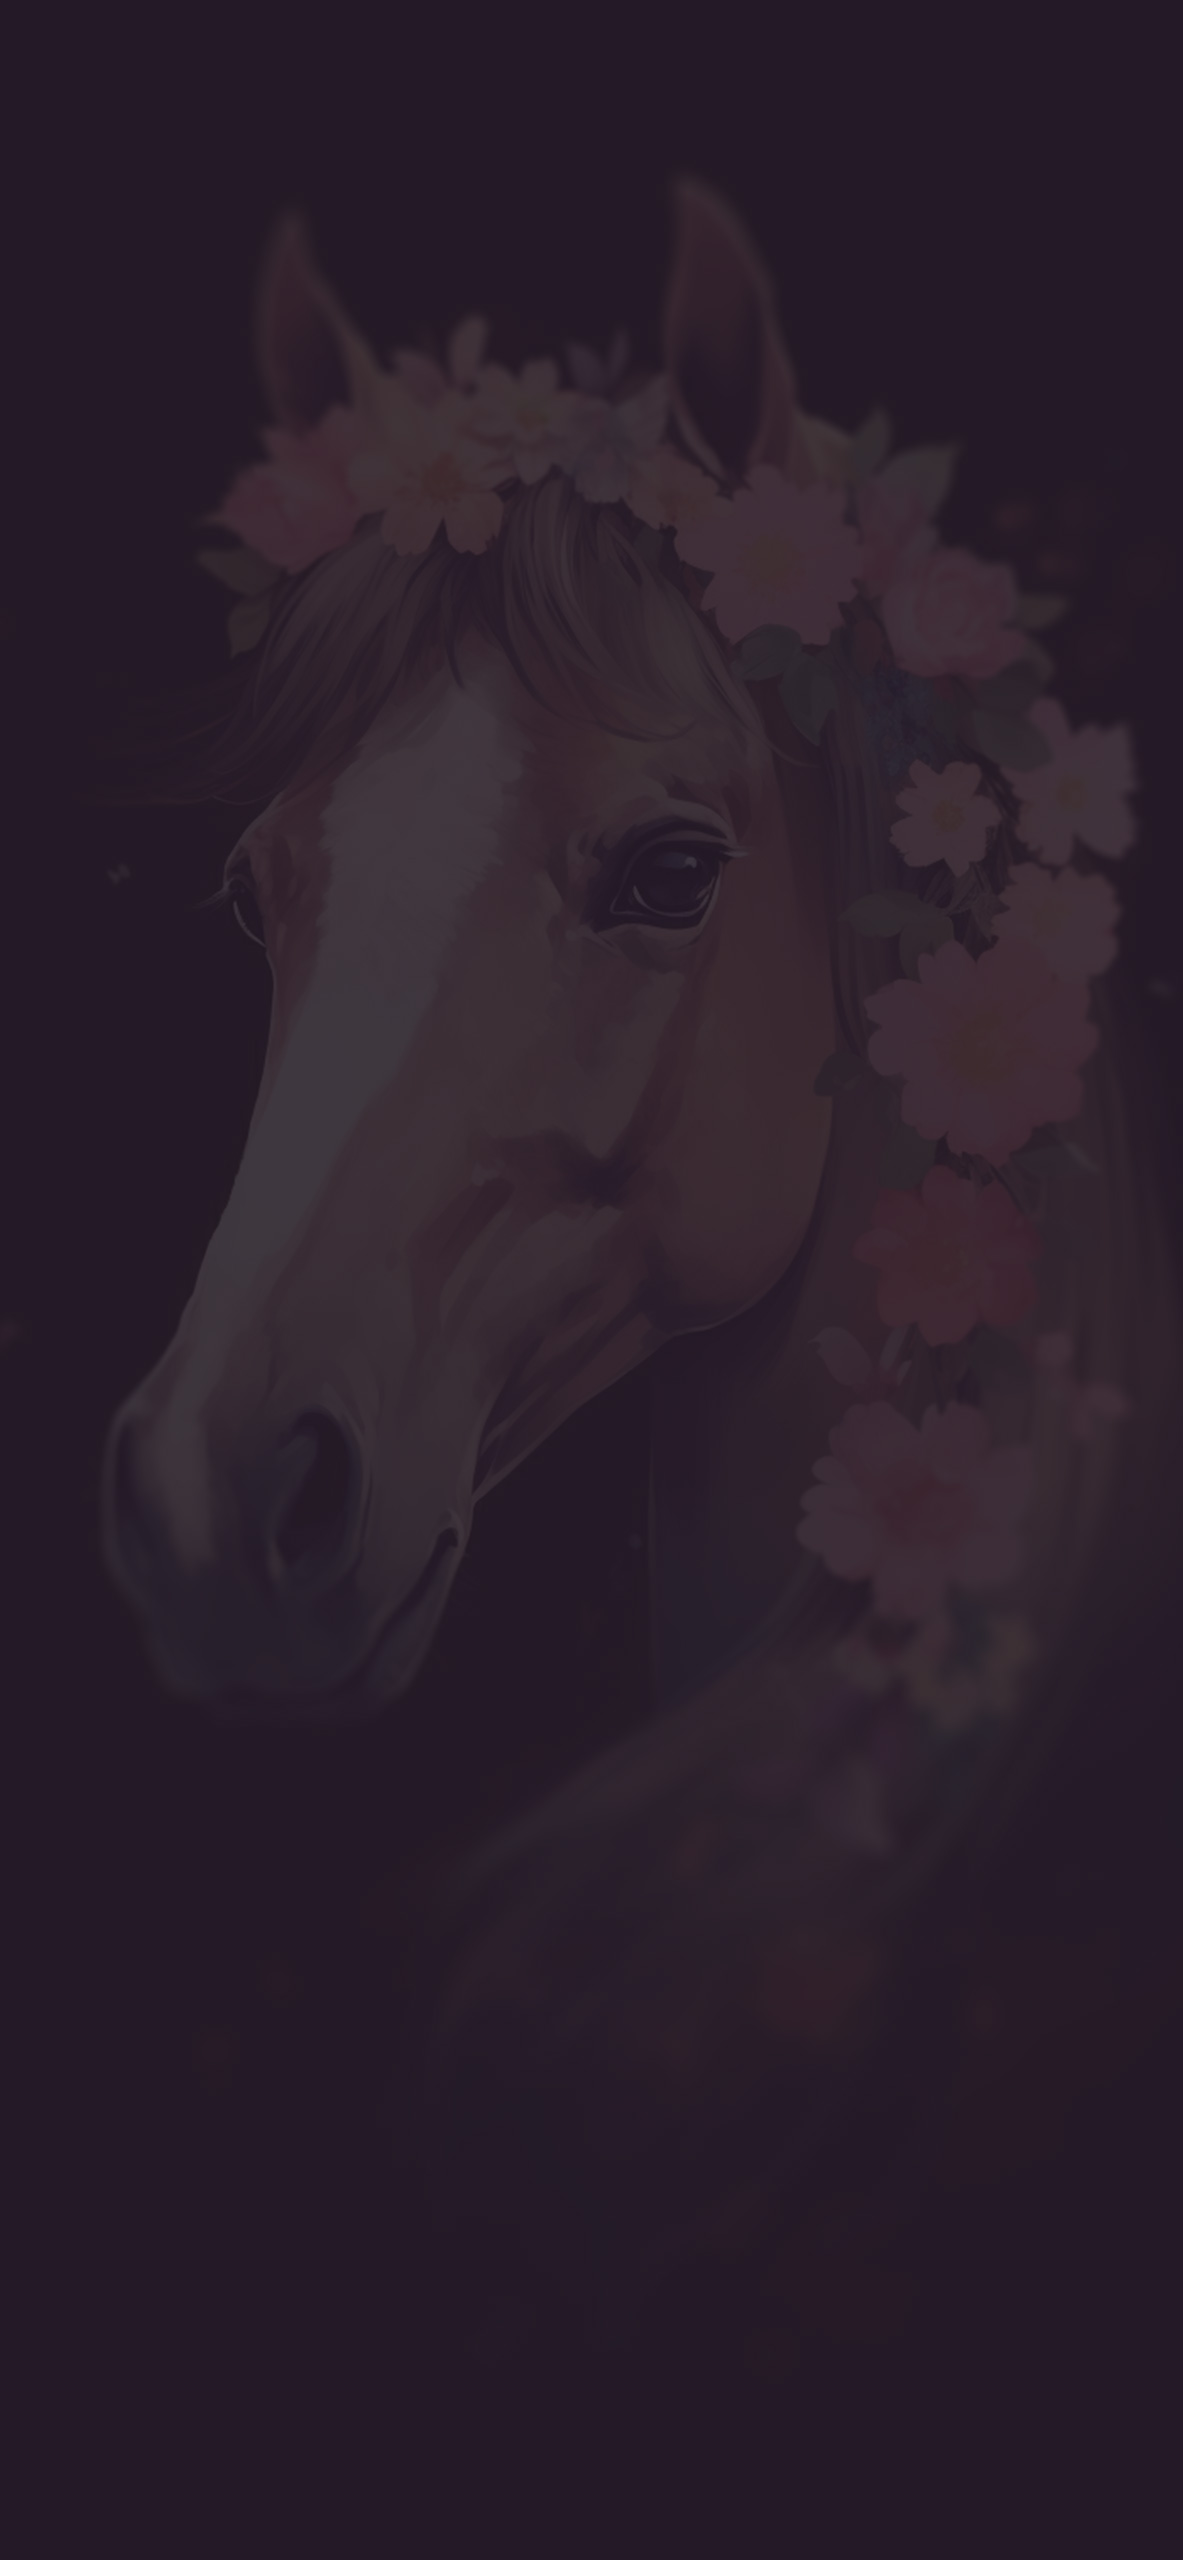 Horse with Flowers Dark Wallpaper Horse Wallpaper for iPhone